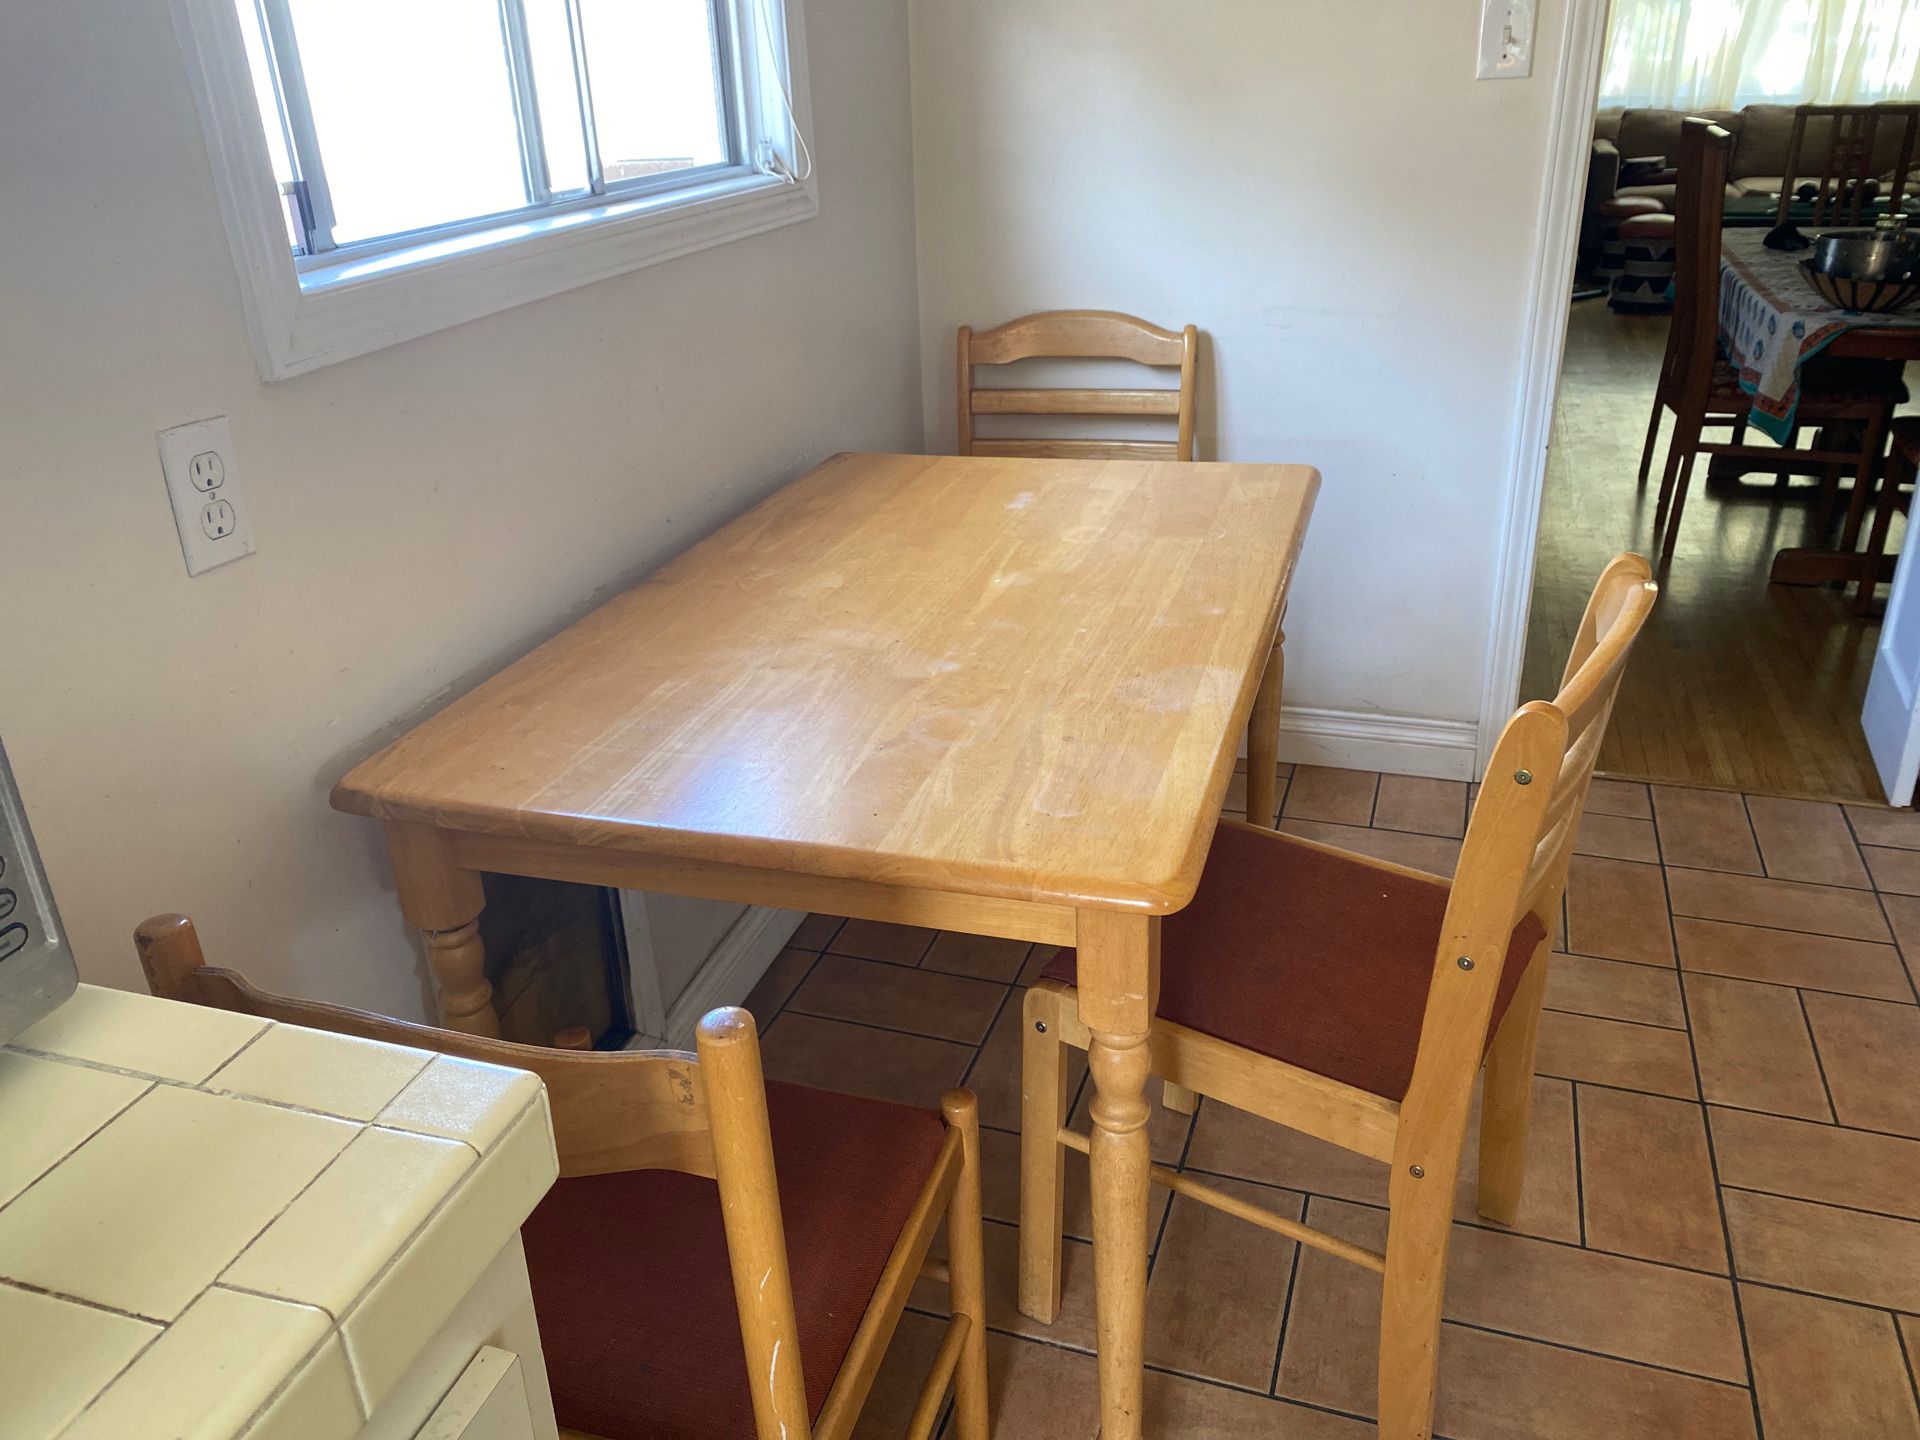 Free wooden Kitchen Table and 3 chairs!